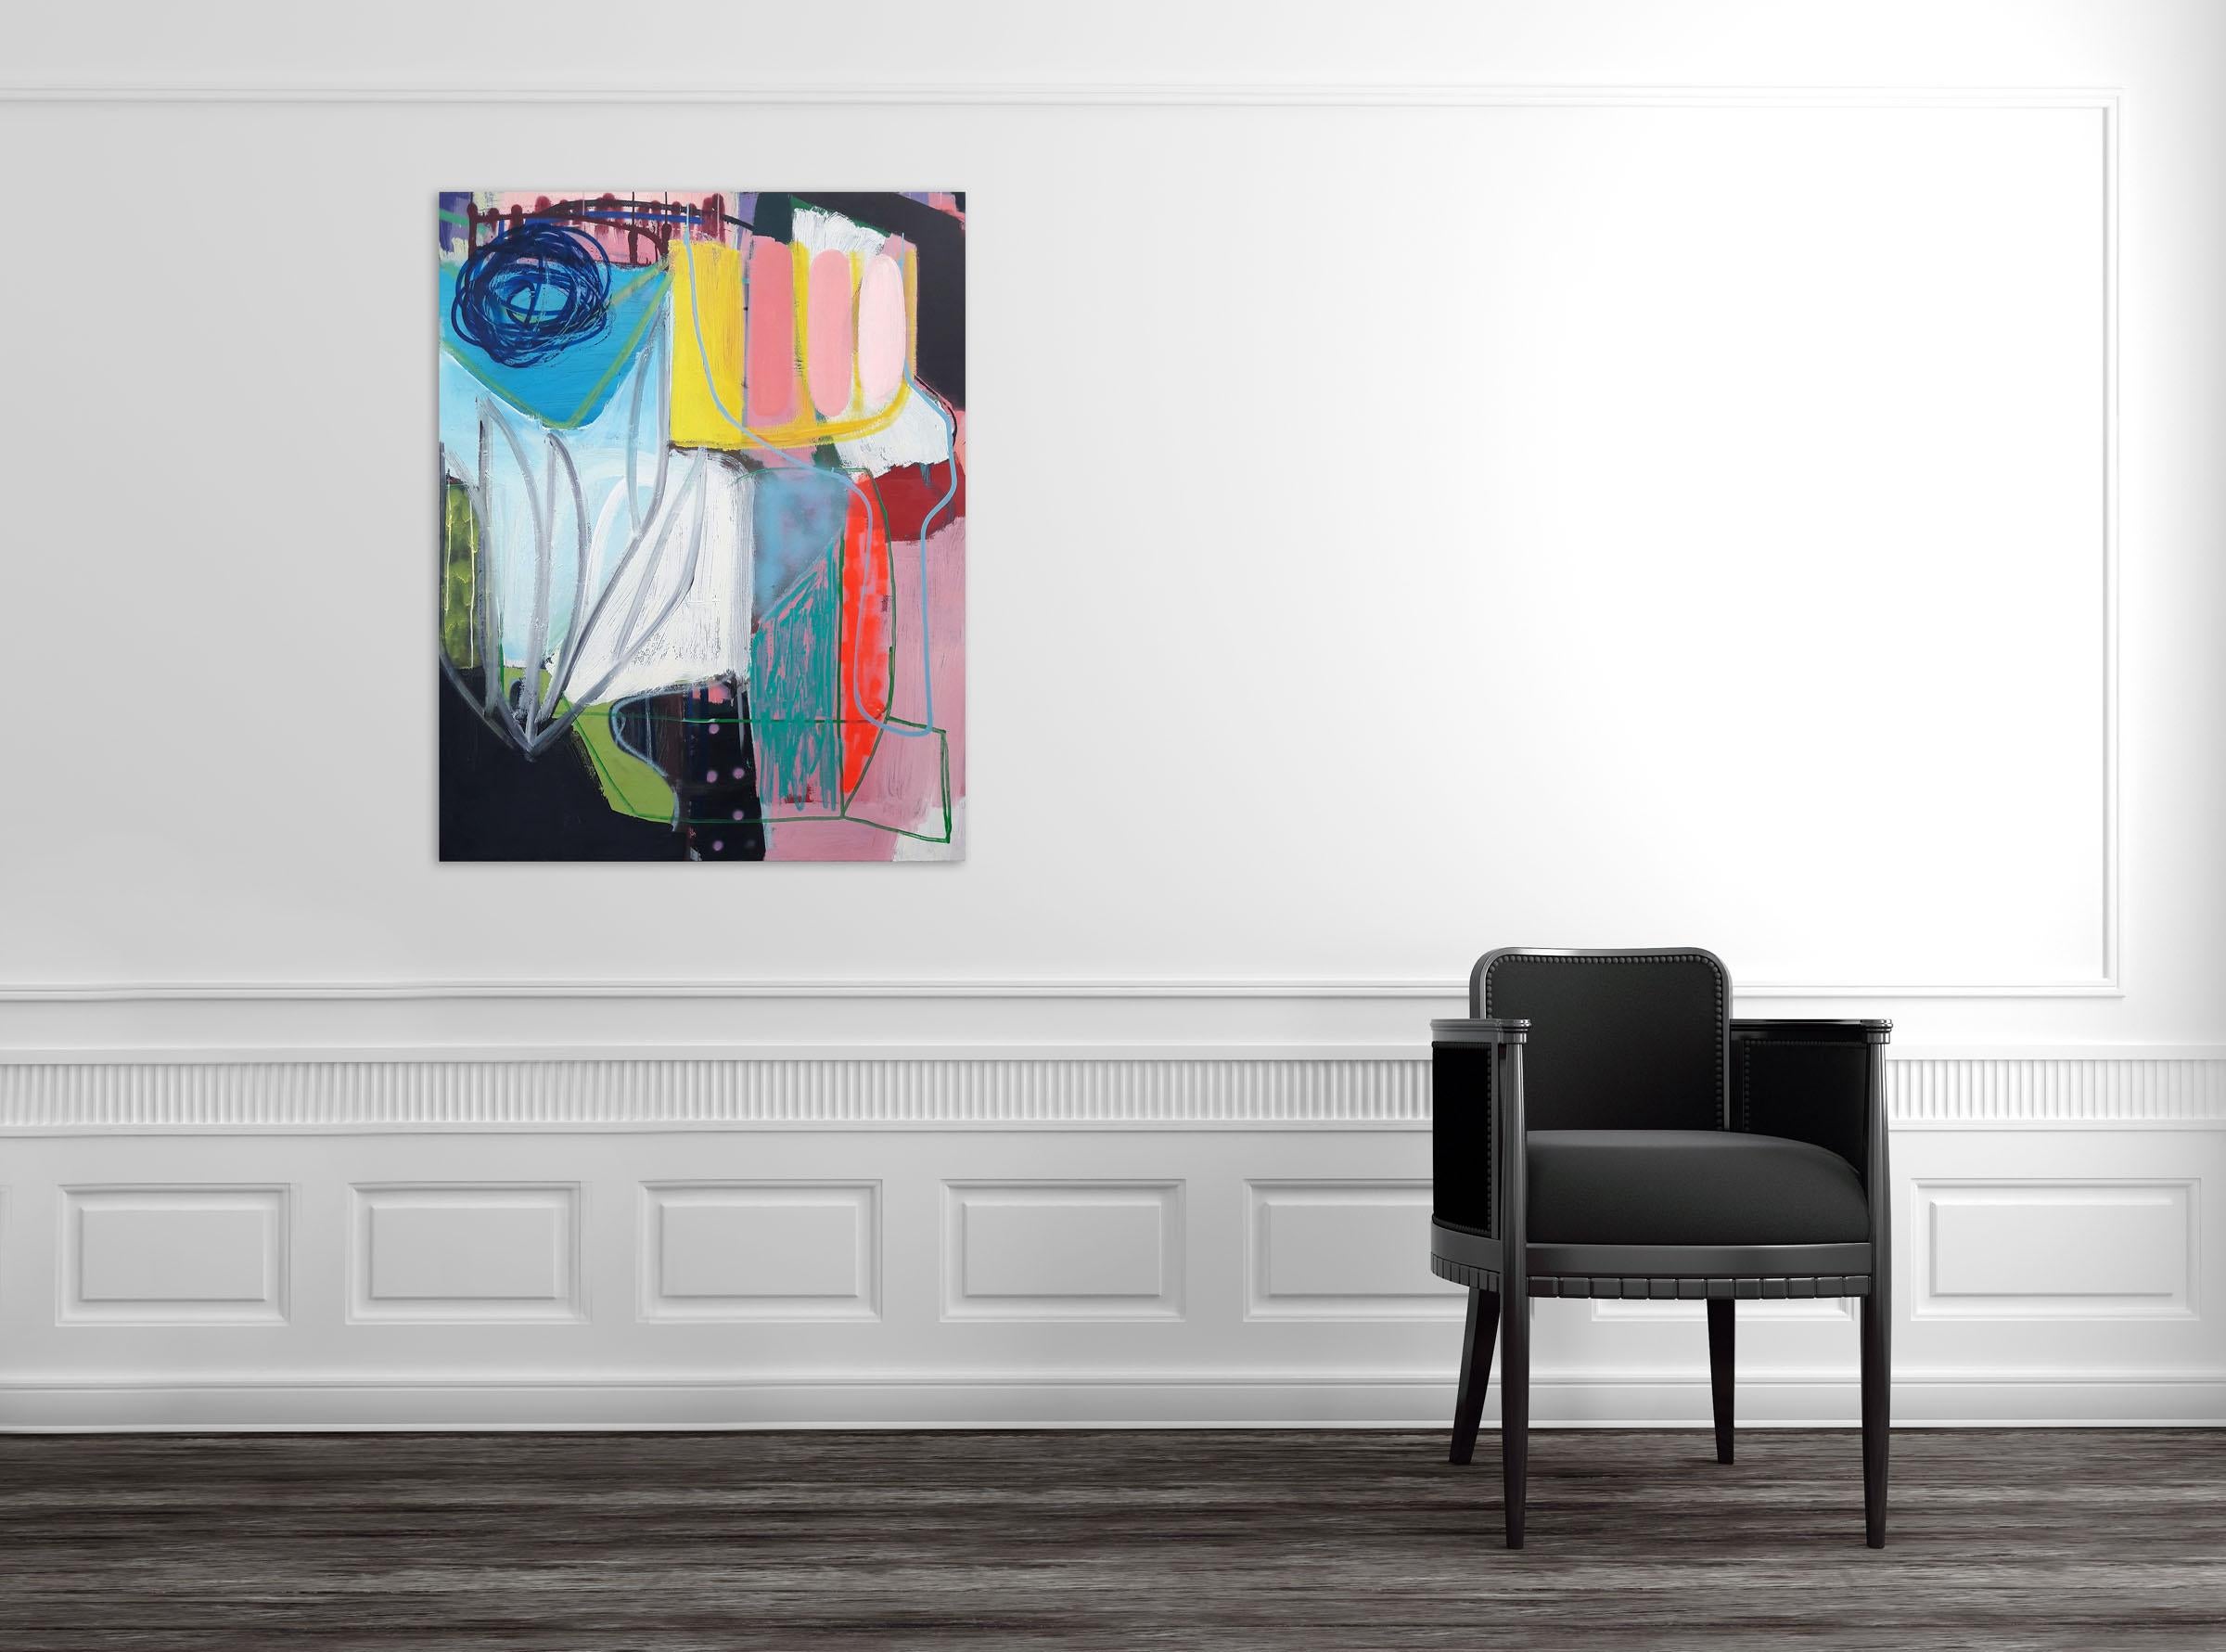 Delight (Abstract Painting) 

Acrylic, spray paint, oil stick on canvas - Unframed

Ludovic Dervillez is a French abstract painter. His work explores the amalgamation of spontaneity, materiality, and emotion through a visual display of color and